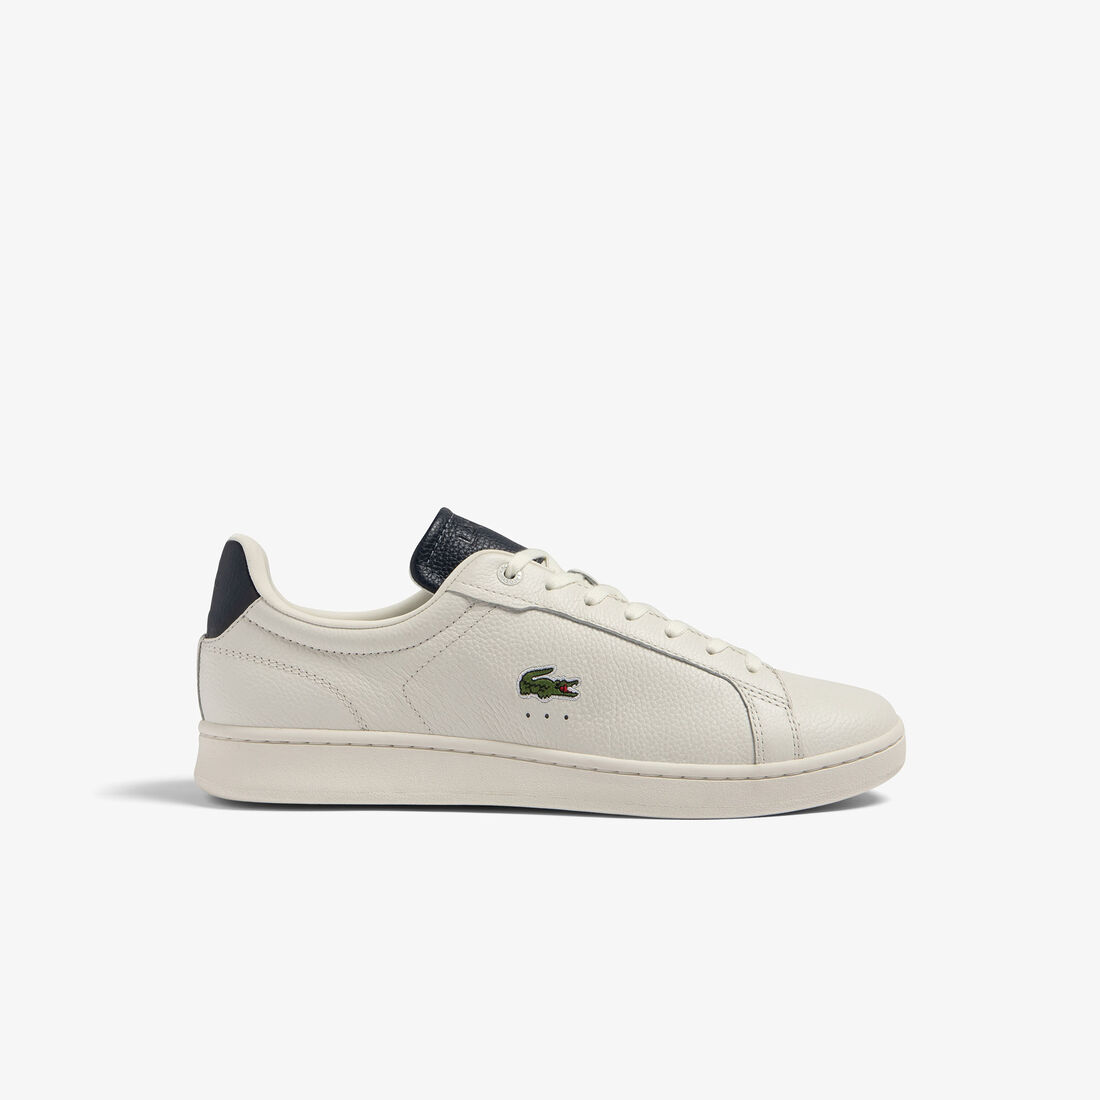 Men's Lacoste Carnaby Pro Leather Tonal Trainers - 45SMA0062-WN1